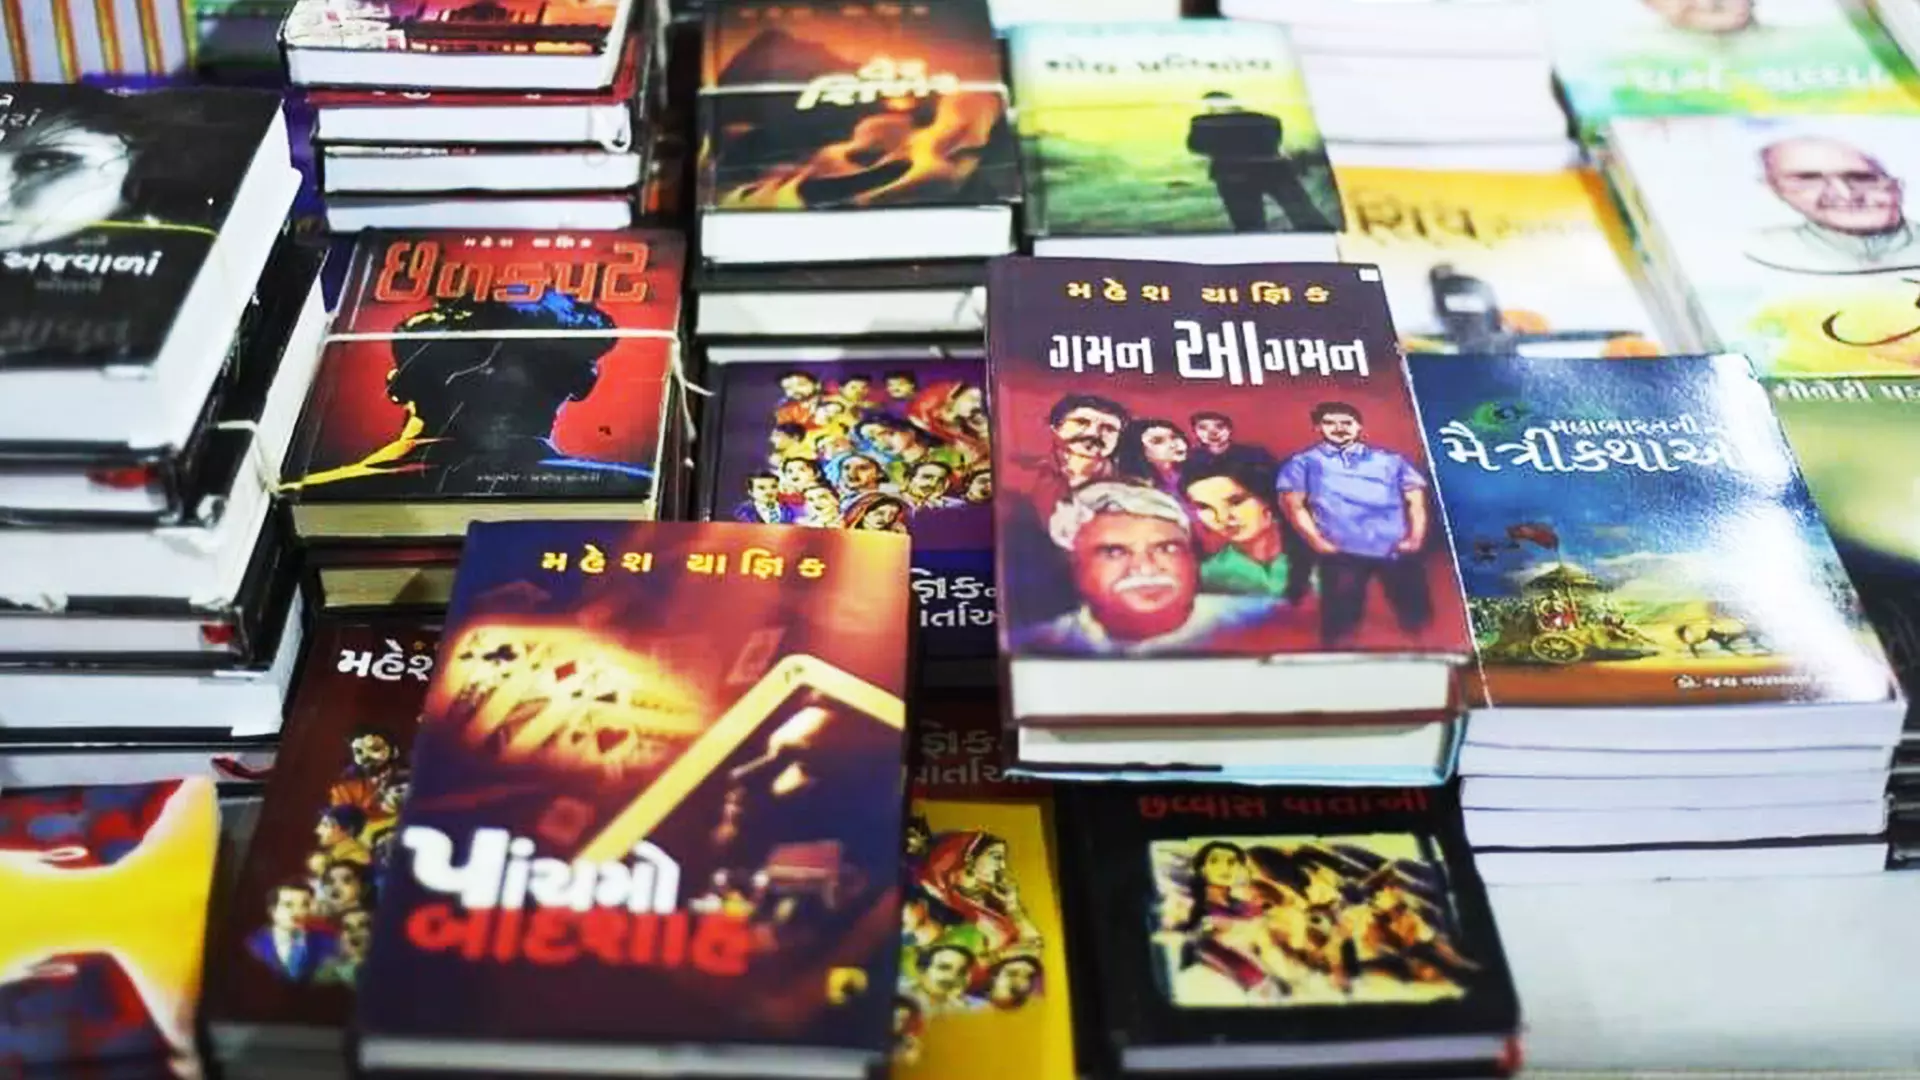 Gaman Agman - a Gujarati novel is one of the few non religious books that sold well.